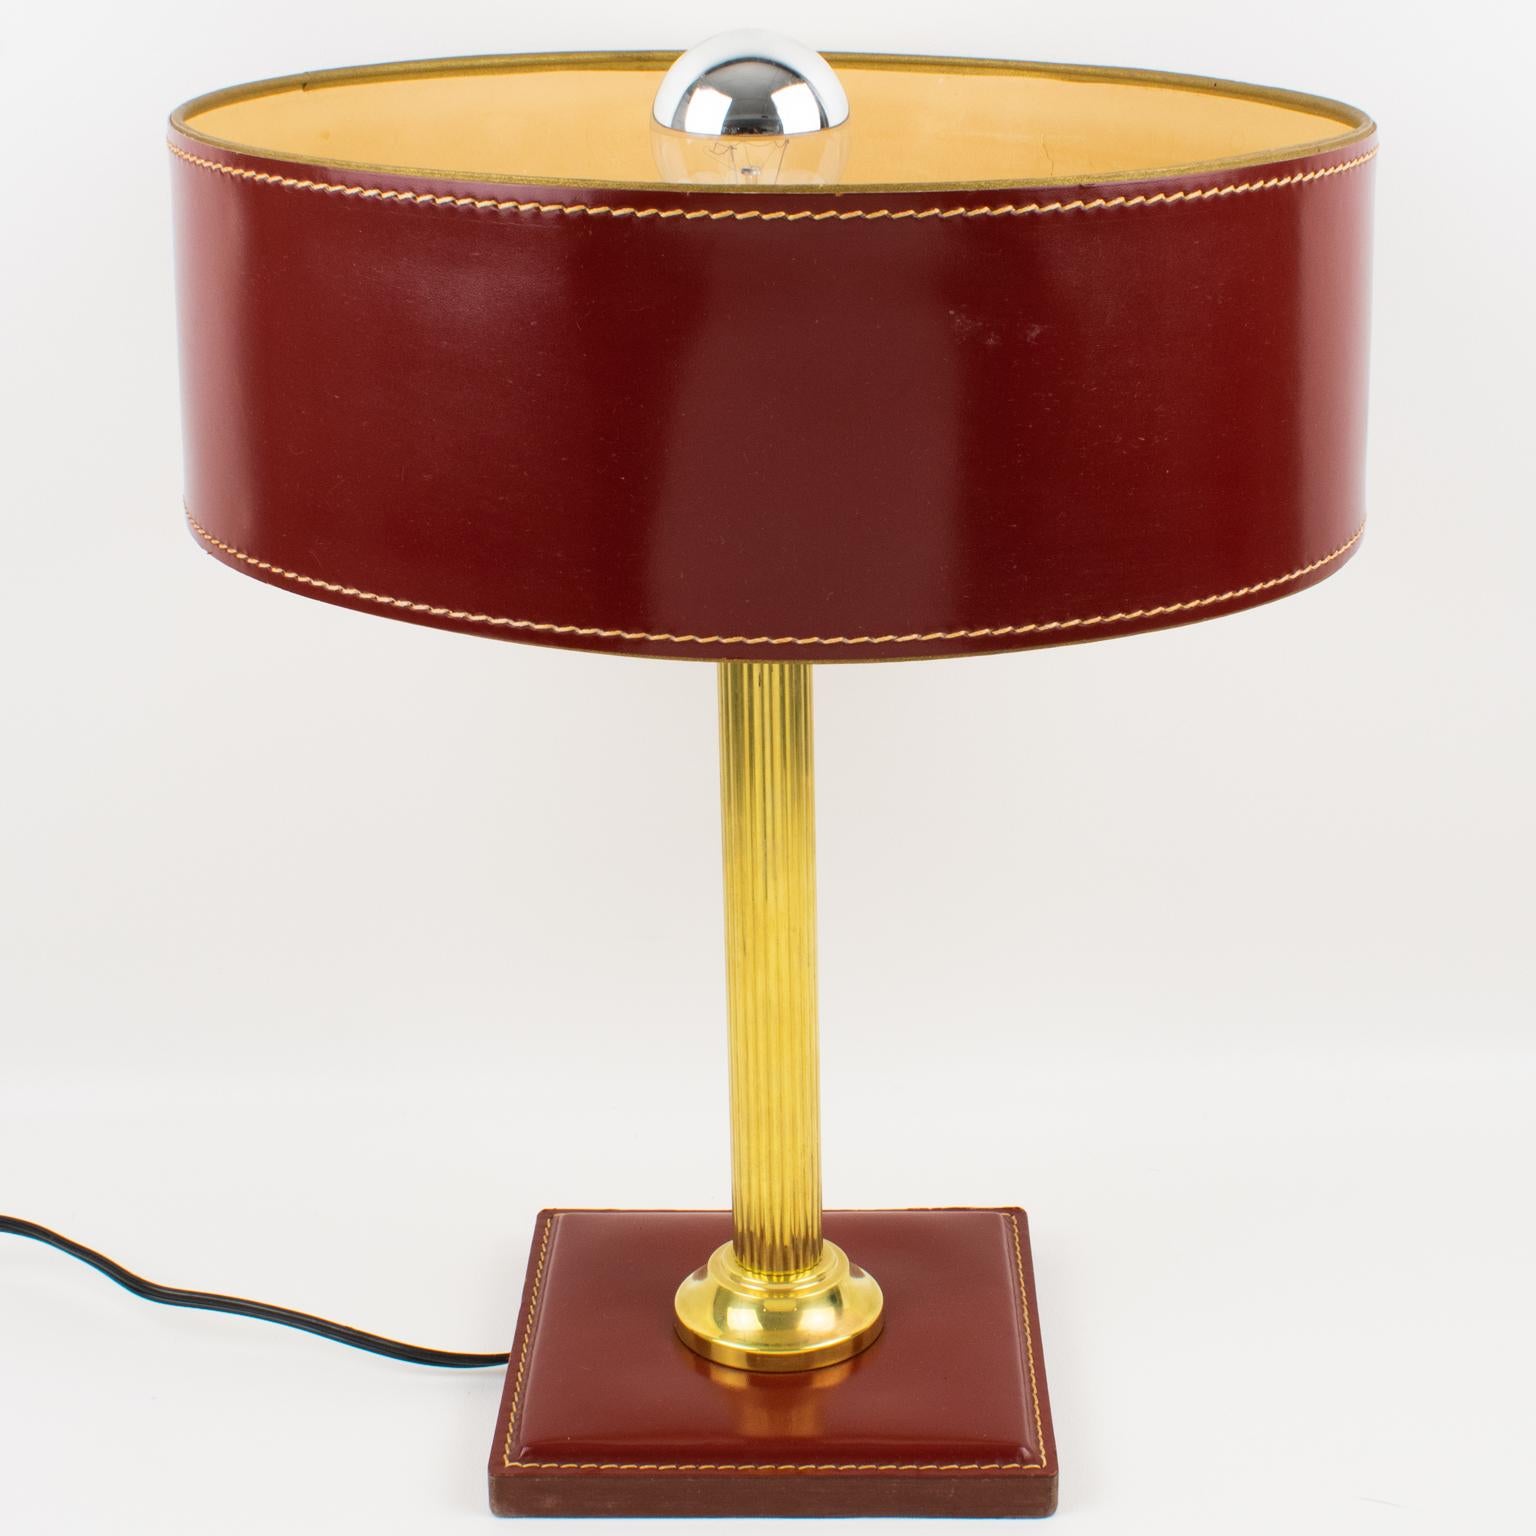 Elegant table lamp designed by Jacques Adnet (1901 - 1984). A classical burgundy-red color lamp features a hand-stitched shade with ivory paper lining, polished brass reeded column stem, and square base in the same hand-stitched burgundy-red